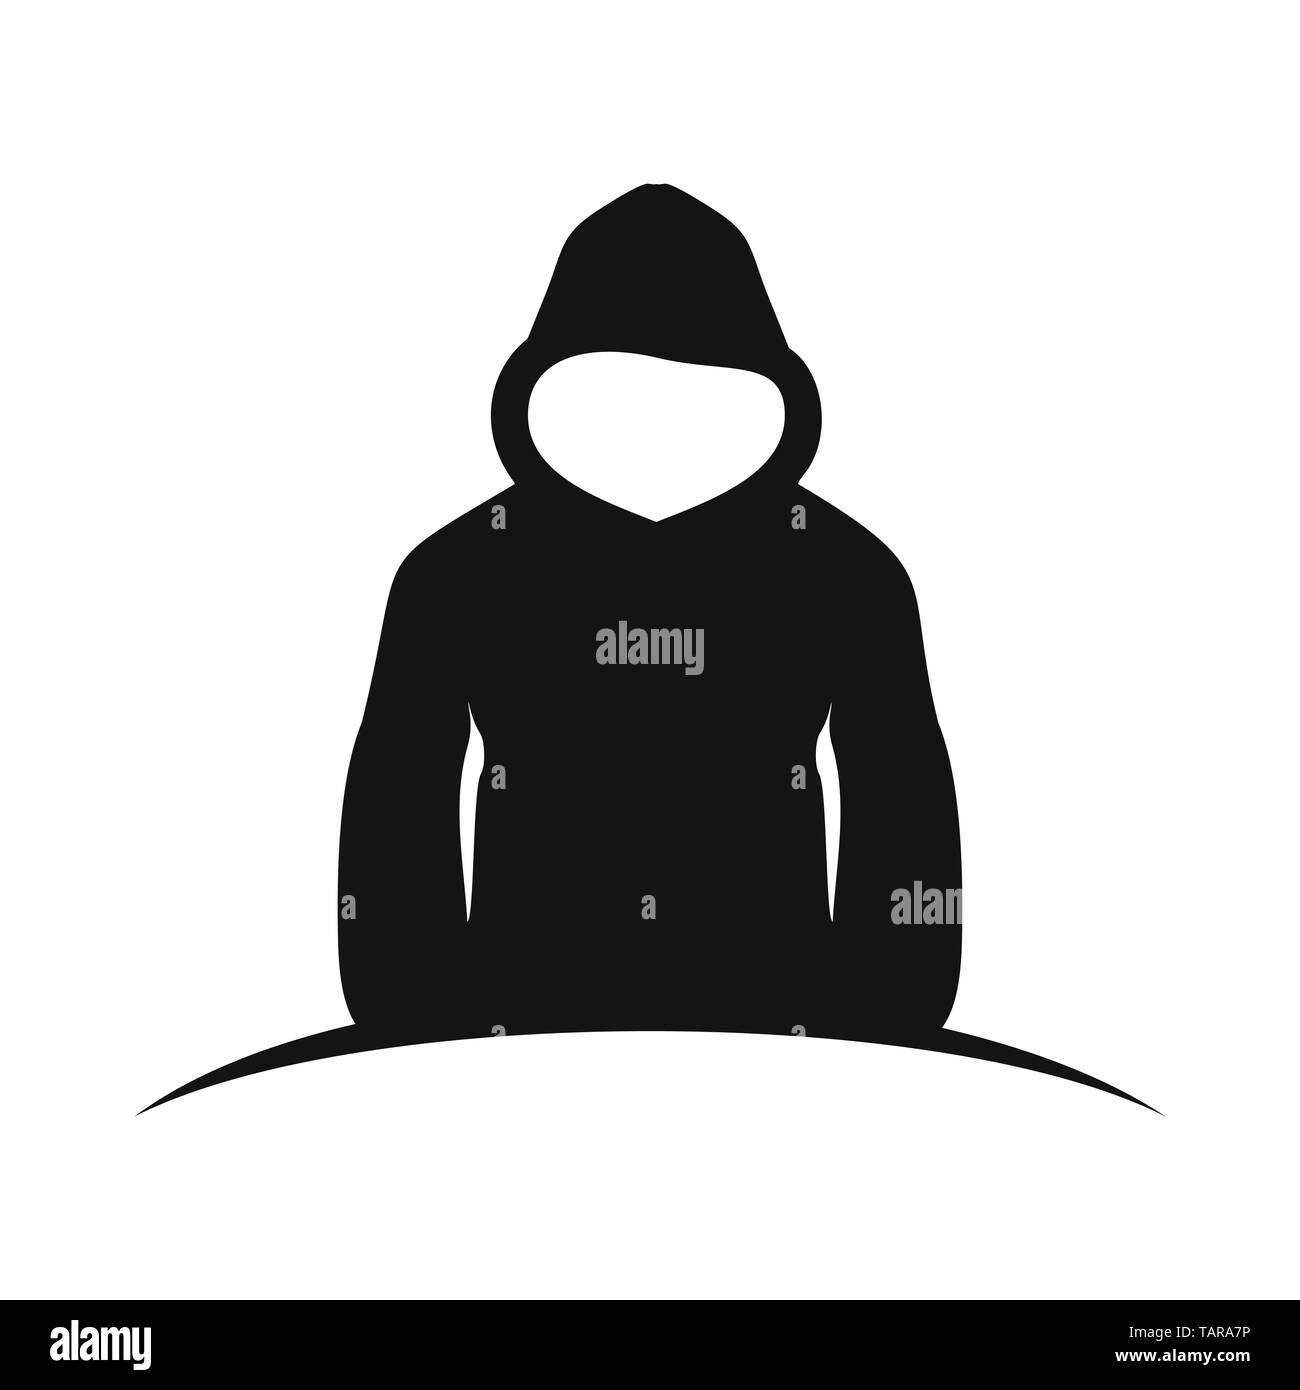 The Man in Hood Silhouette Rising Vector Illustration Symbol Graphic Logo Design Template Stock Vector